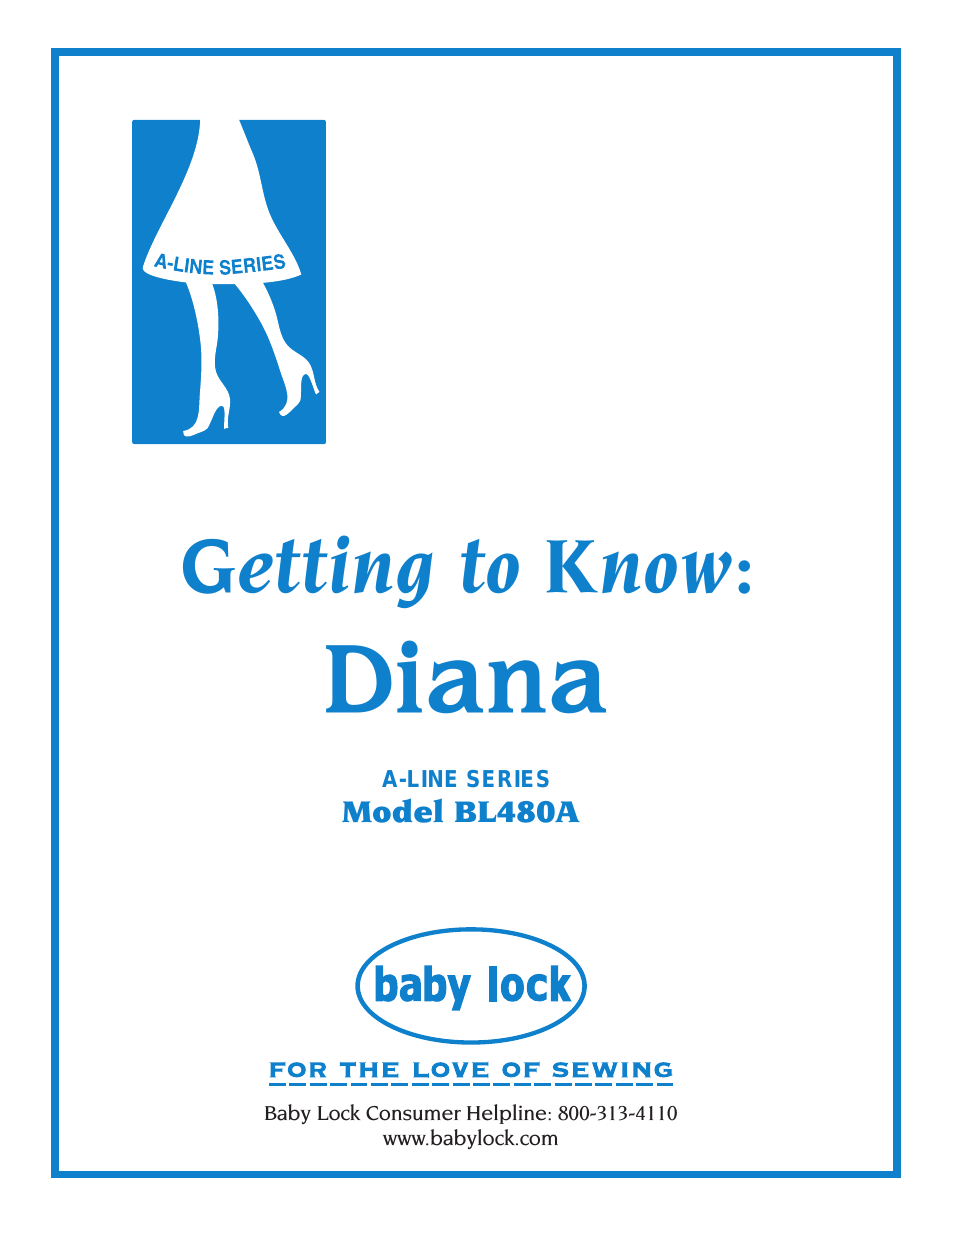 Diana (BL480A) Getting to Know Guide